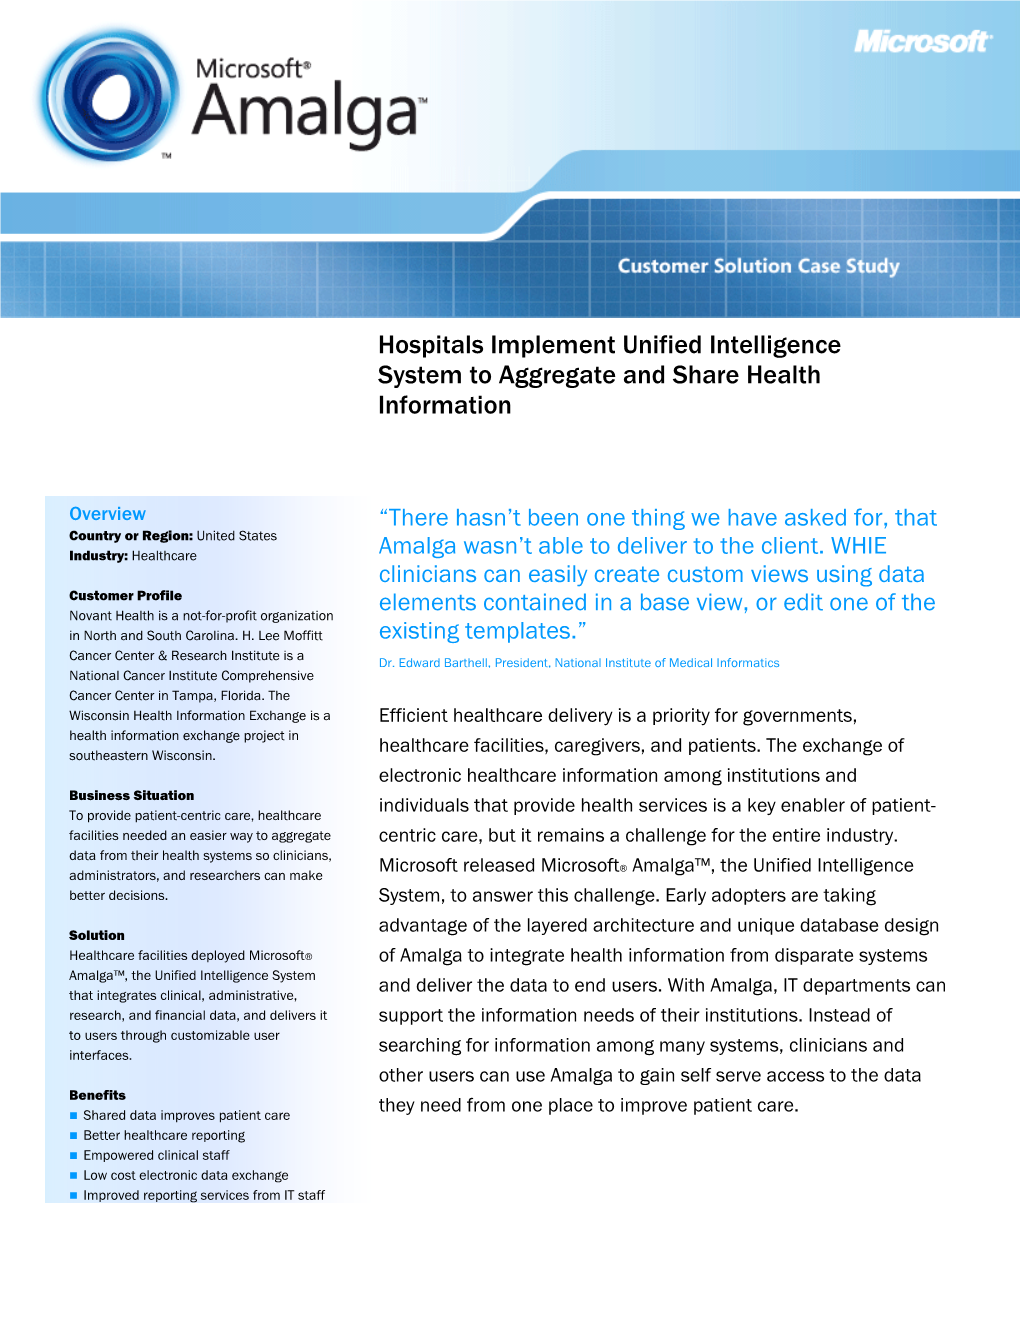 Hospitals Implement Unified Intelligence System to Aggregate and Share Health Information